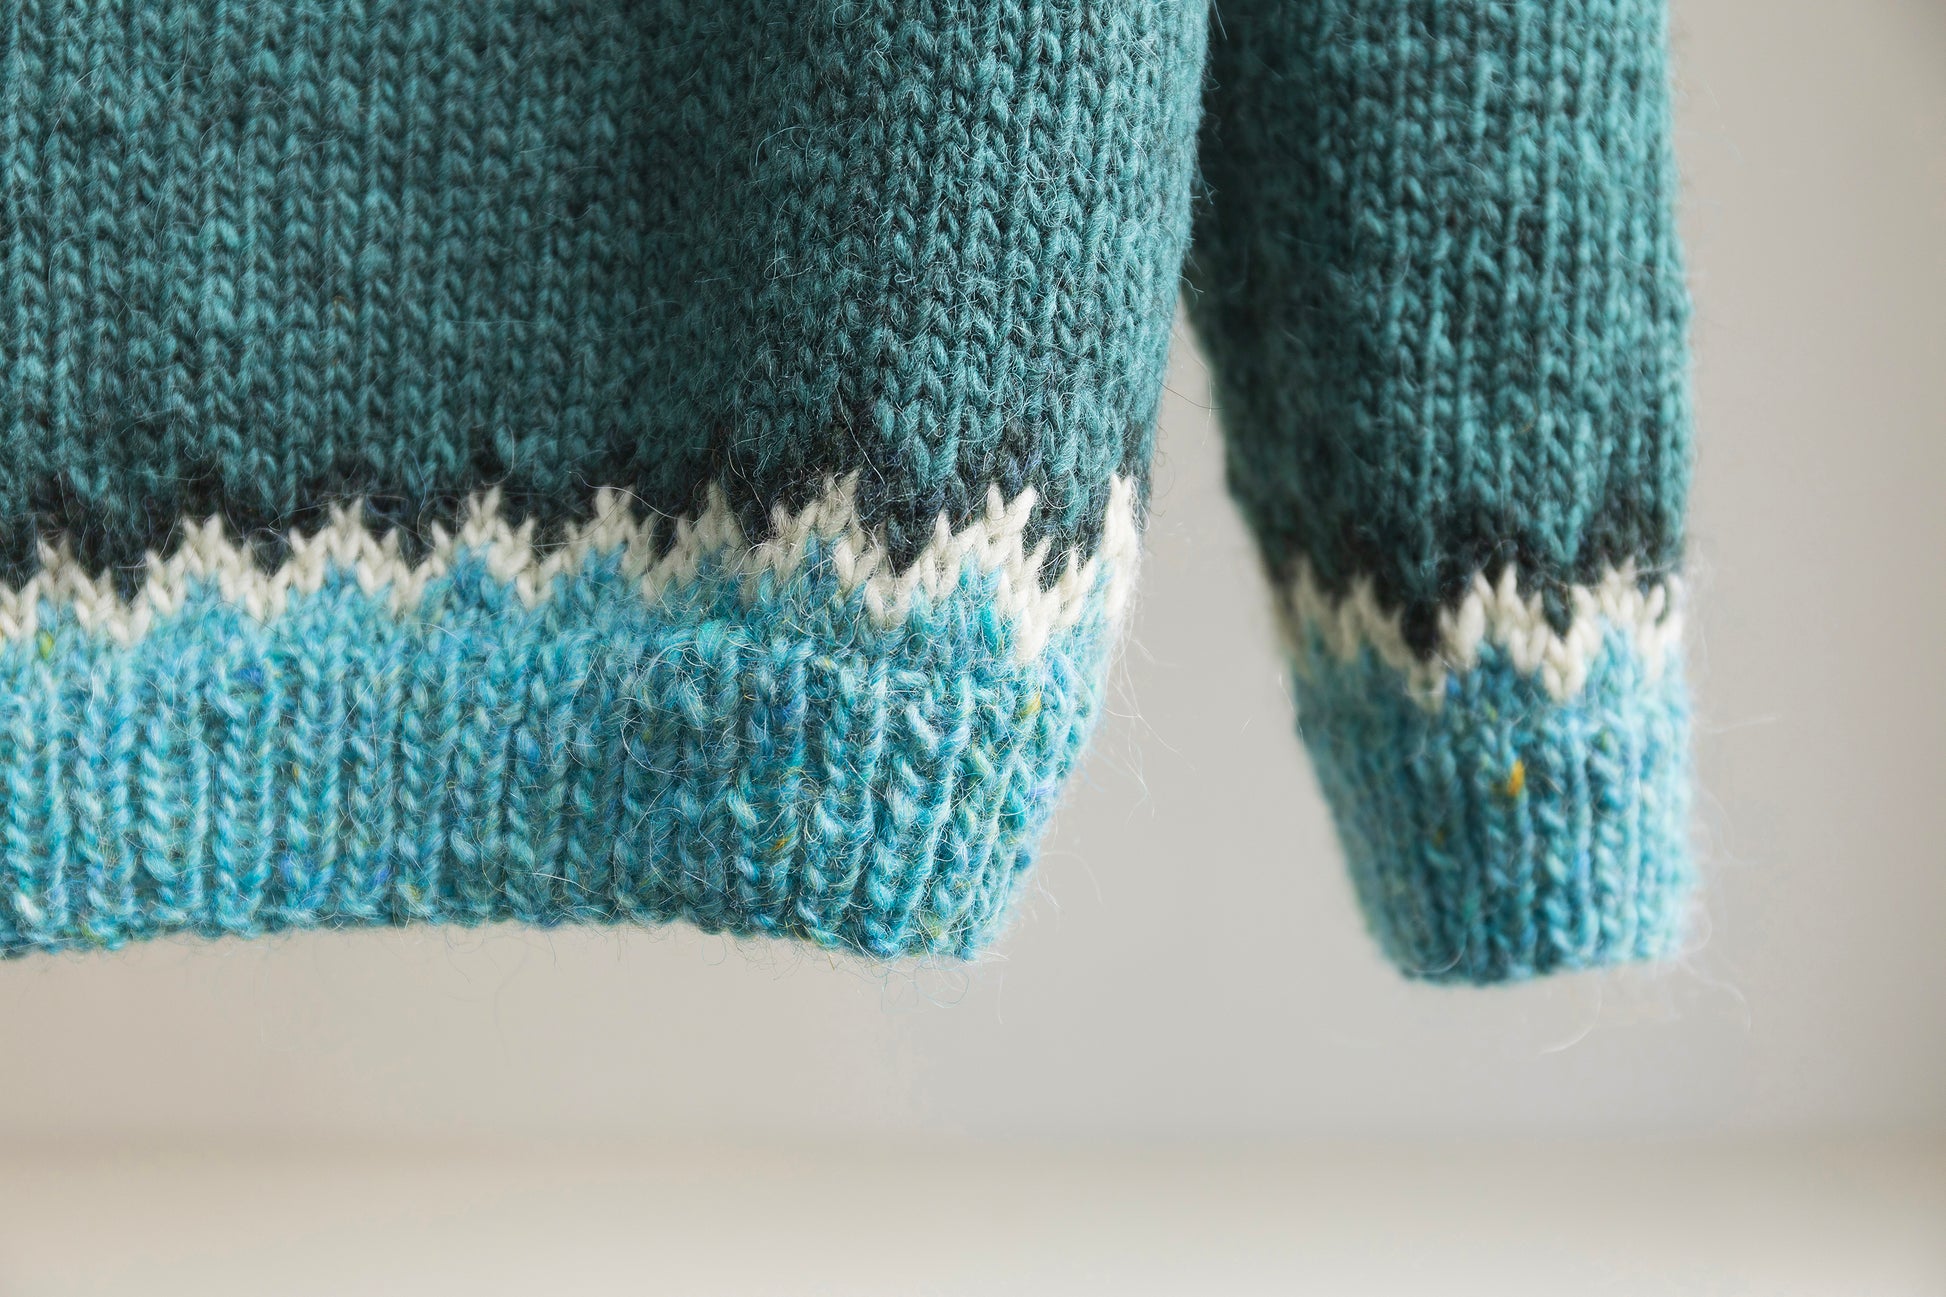 Details of Turquoise and white knitted Icelandic lopapeysa sweater in Puffins knitting pattern